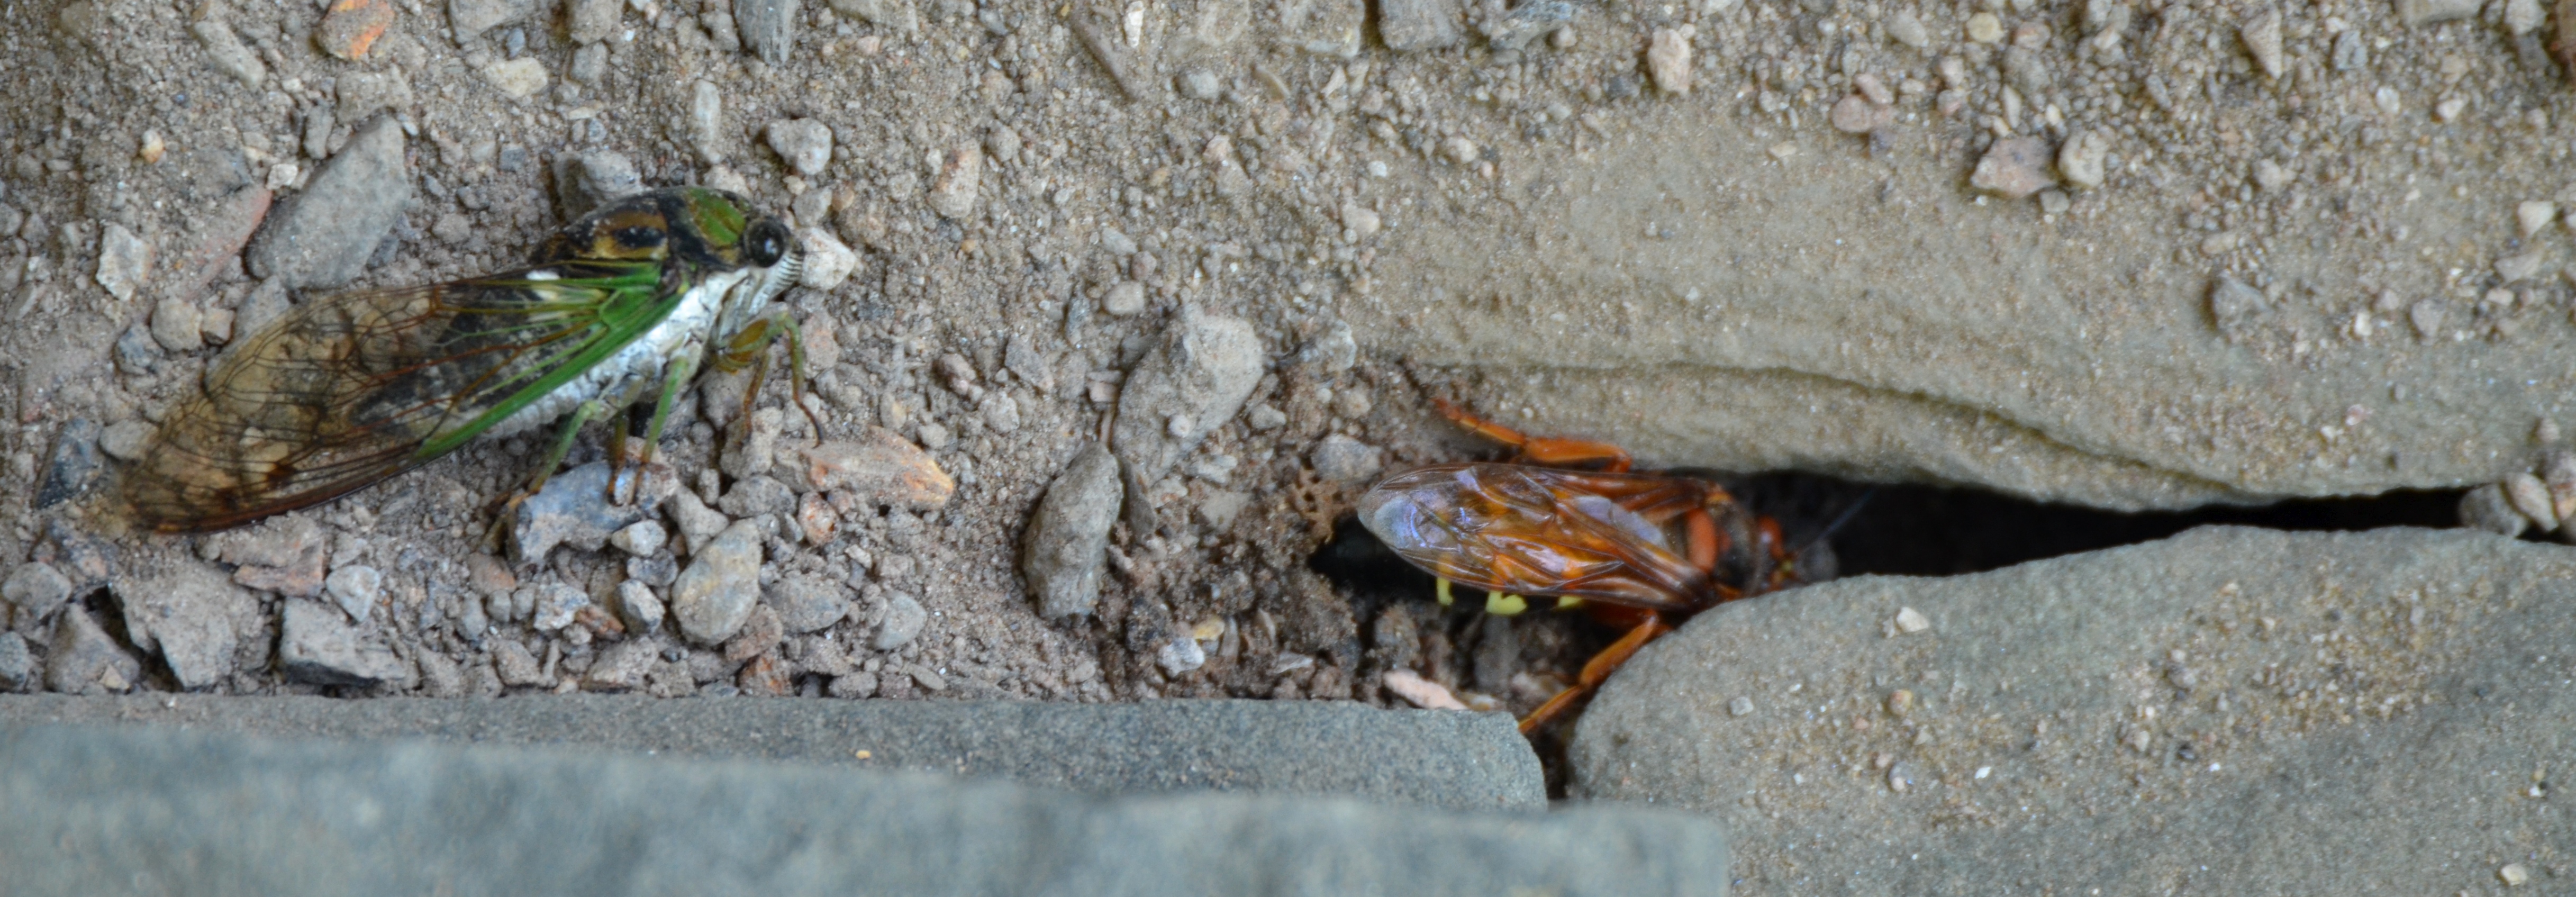 The Cicada Killer digs the hole wider 